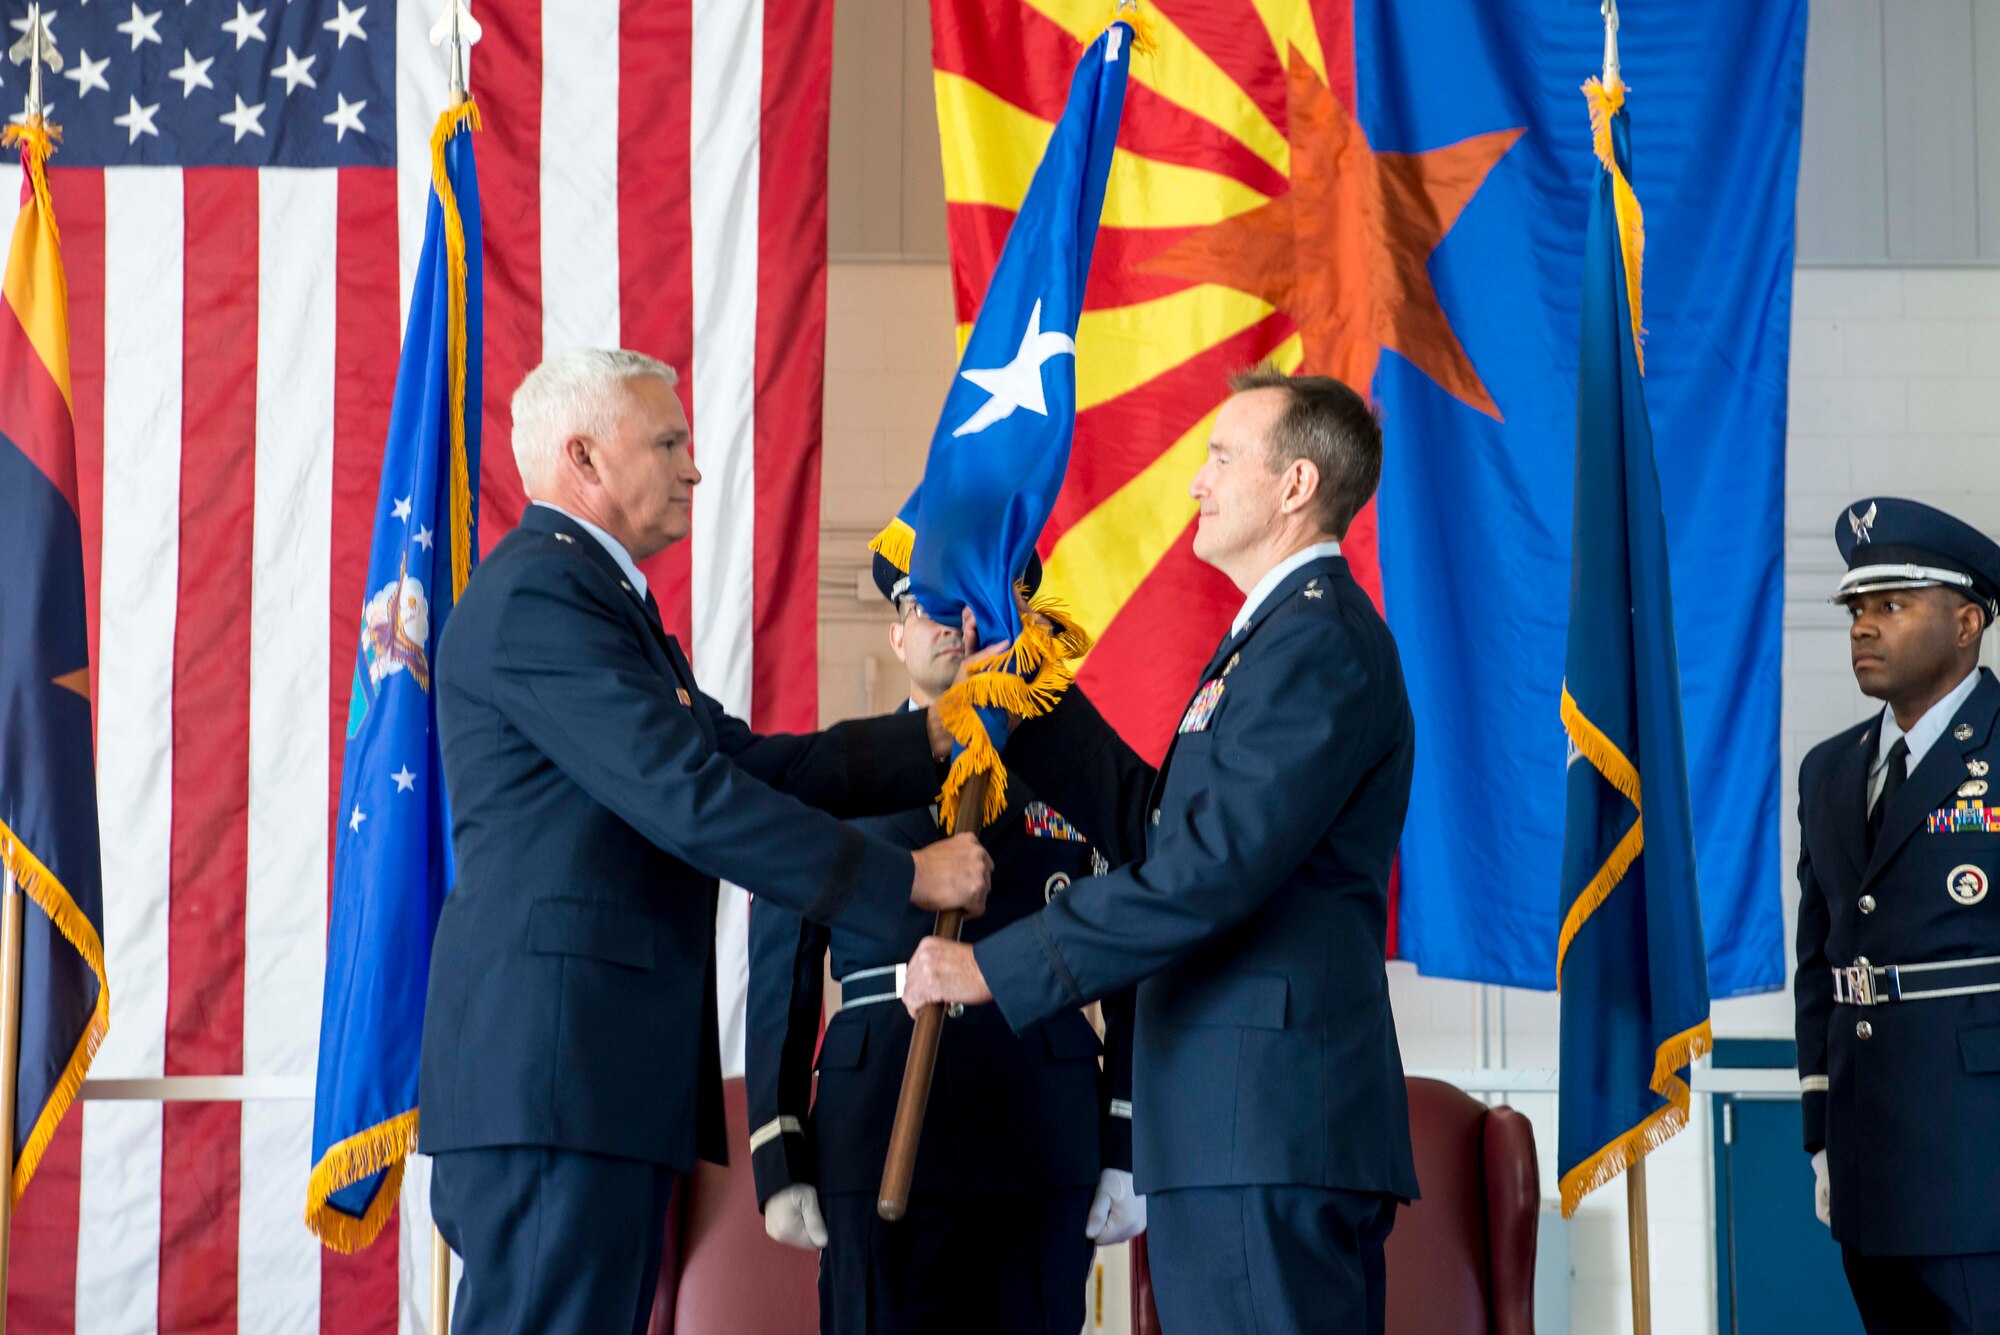 TUCSON, Ariz. -- The commander of the Arizona Air National Guard, Brig. Gen. Edward P. Maxwell, left, symbolically recognizes the presence of a new general by passing the customary one-star brigadier general flag to newly-promoted Brig. Gen. Howard P. Purcell, 162nd Wing Commander. “No matter what my rank, being a part of your team is the job of a lifetime,” said Purcell. “I am extremely proud to be your commander and can’t thank you enough.” (U.S. Air National Guard photo by Tech. Sgt. Hollie A. Hansen /Released)